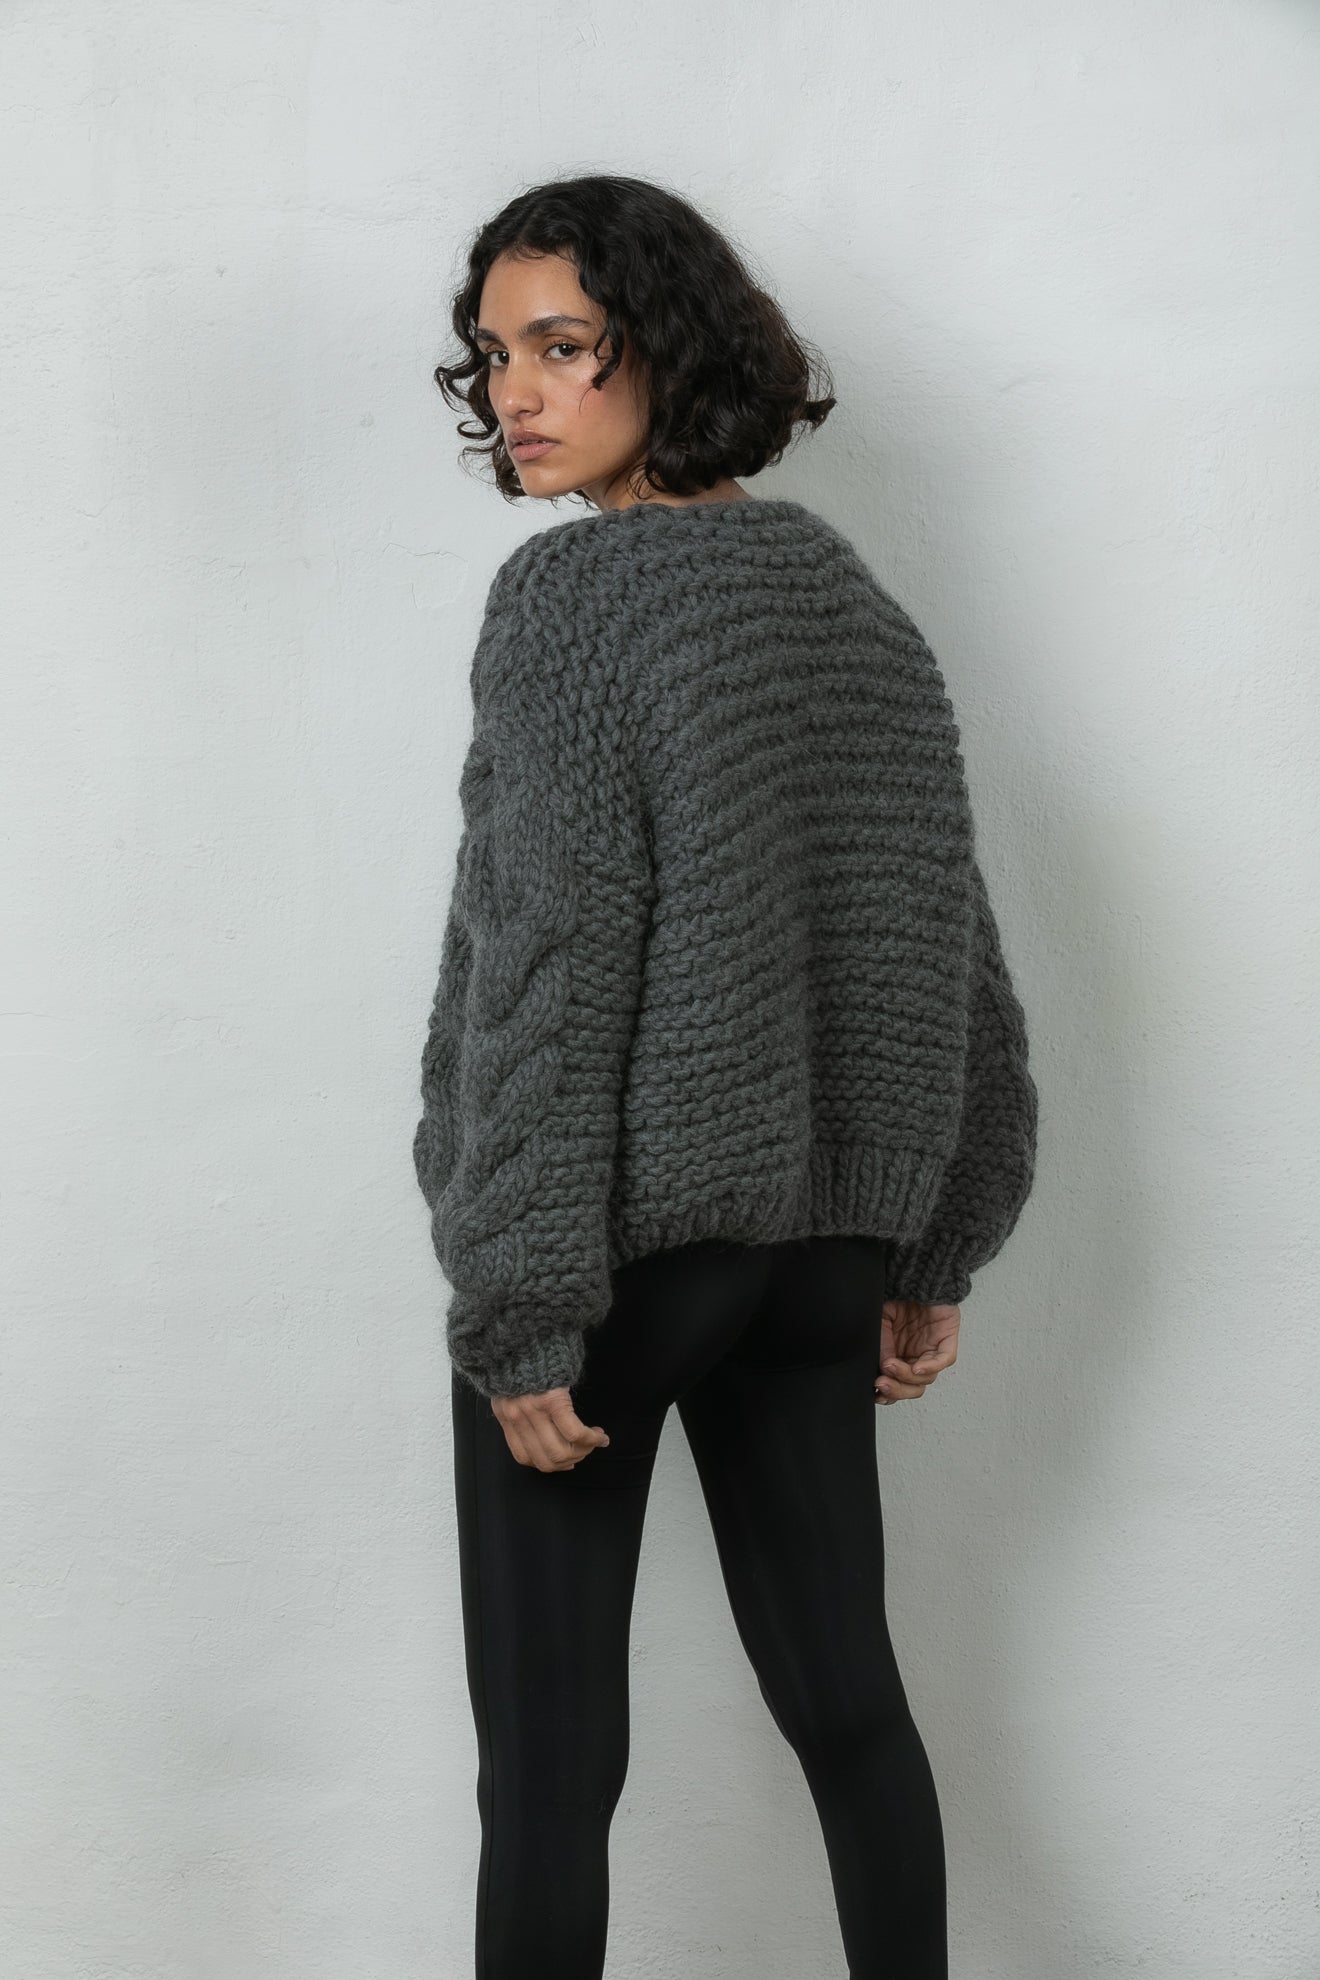 wool bomber cardigan chunky knitted Mr Mittens charcoal grey